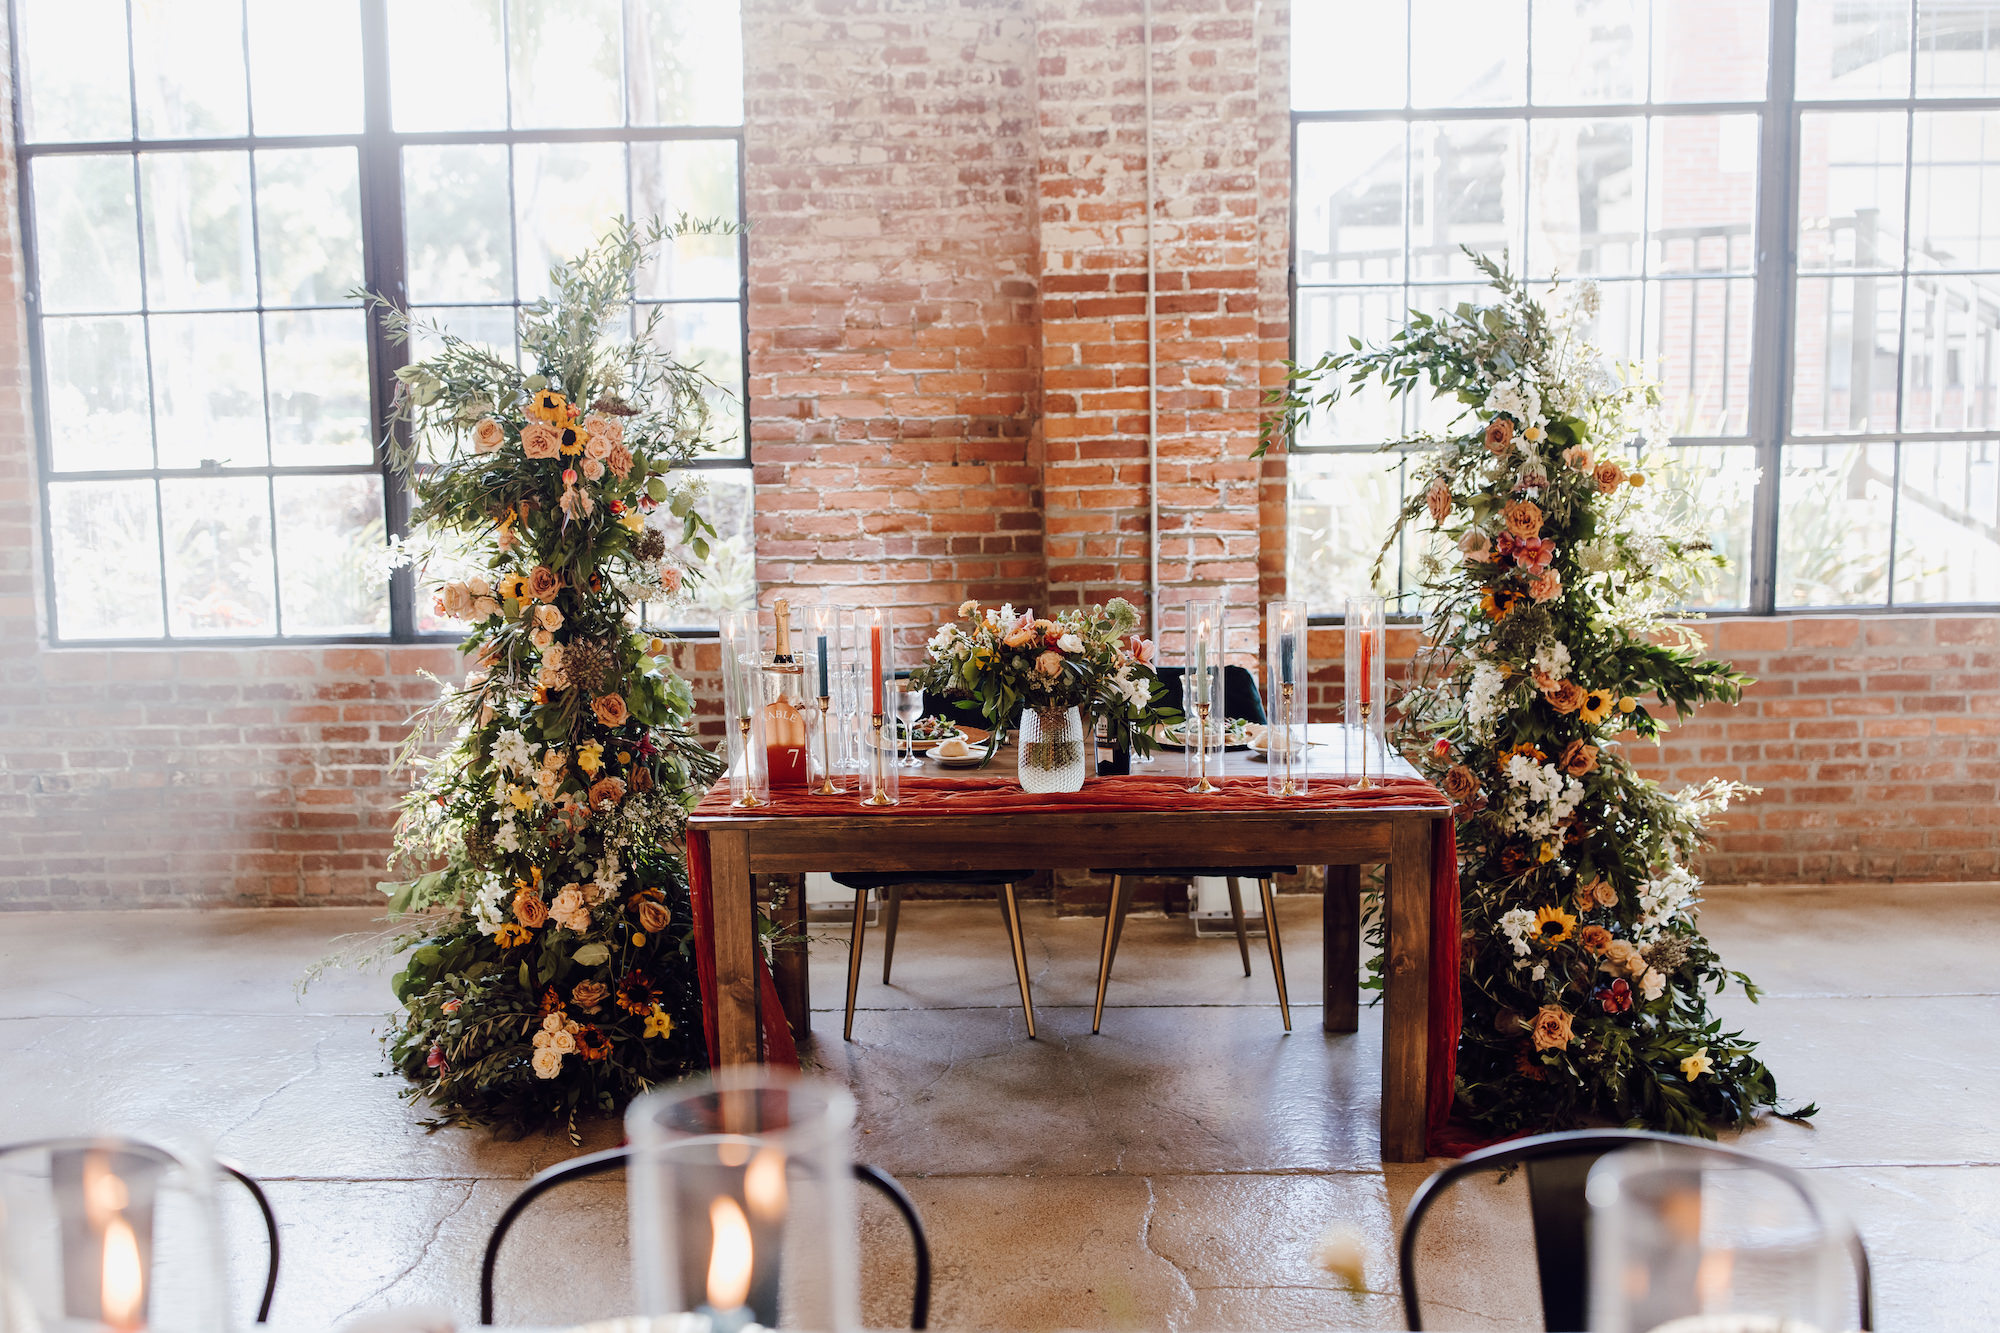 Sweetheart Head Wedding Reception Table Decor | Hurricane and Taper Candles | Boho Yellow, Orange, and White Flower Column with Greenery Inspiration | Dade City Planner Special Moments Event Planning | Venue at The Block